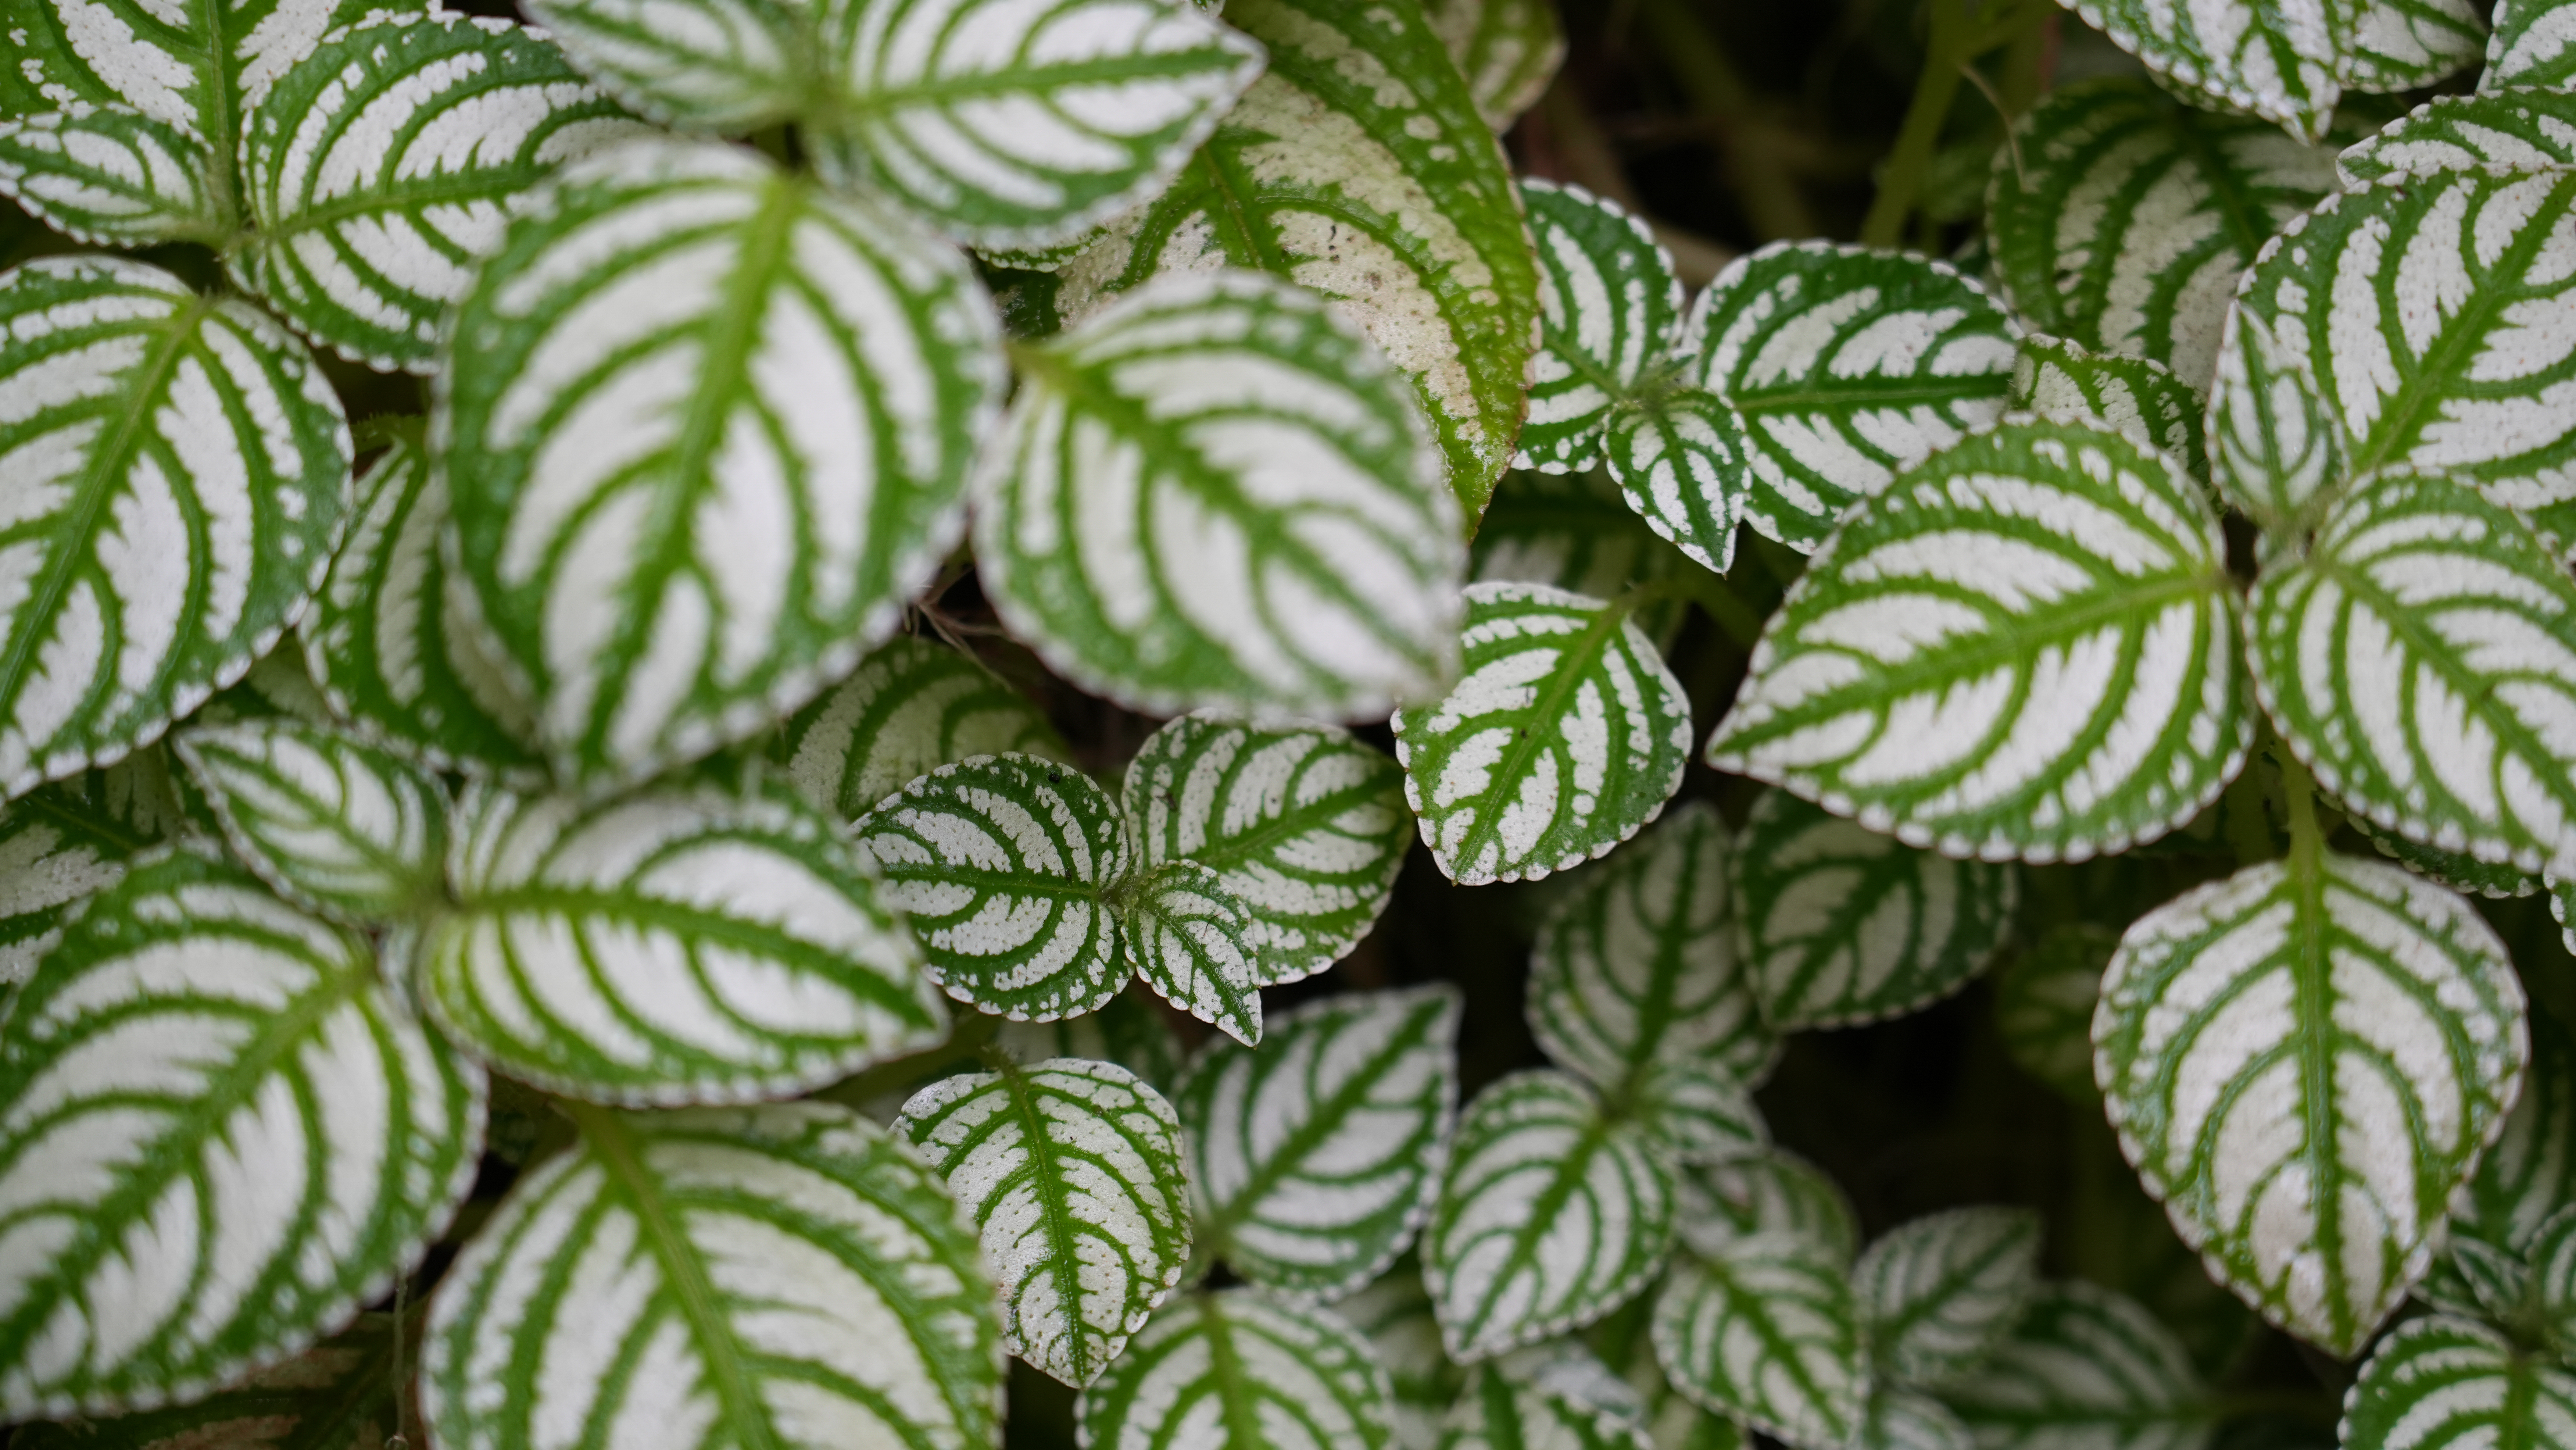 Layers of green and white leaves